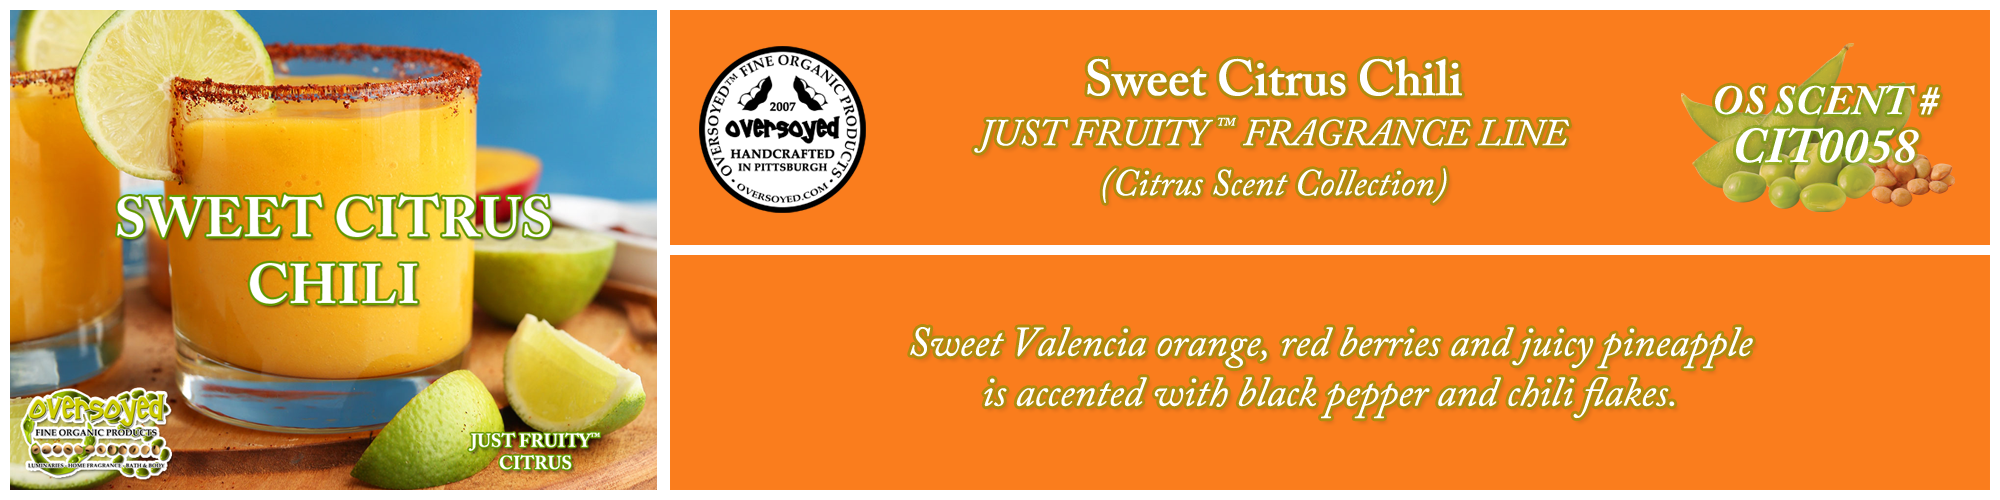 Sweet Citrus Chili Handcrafted Products Collection